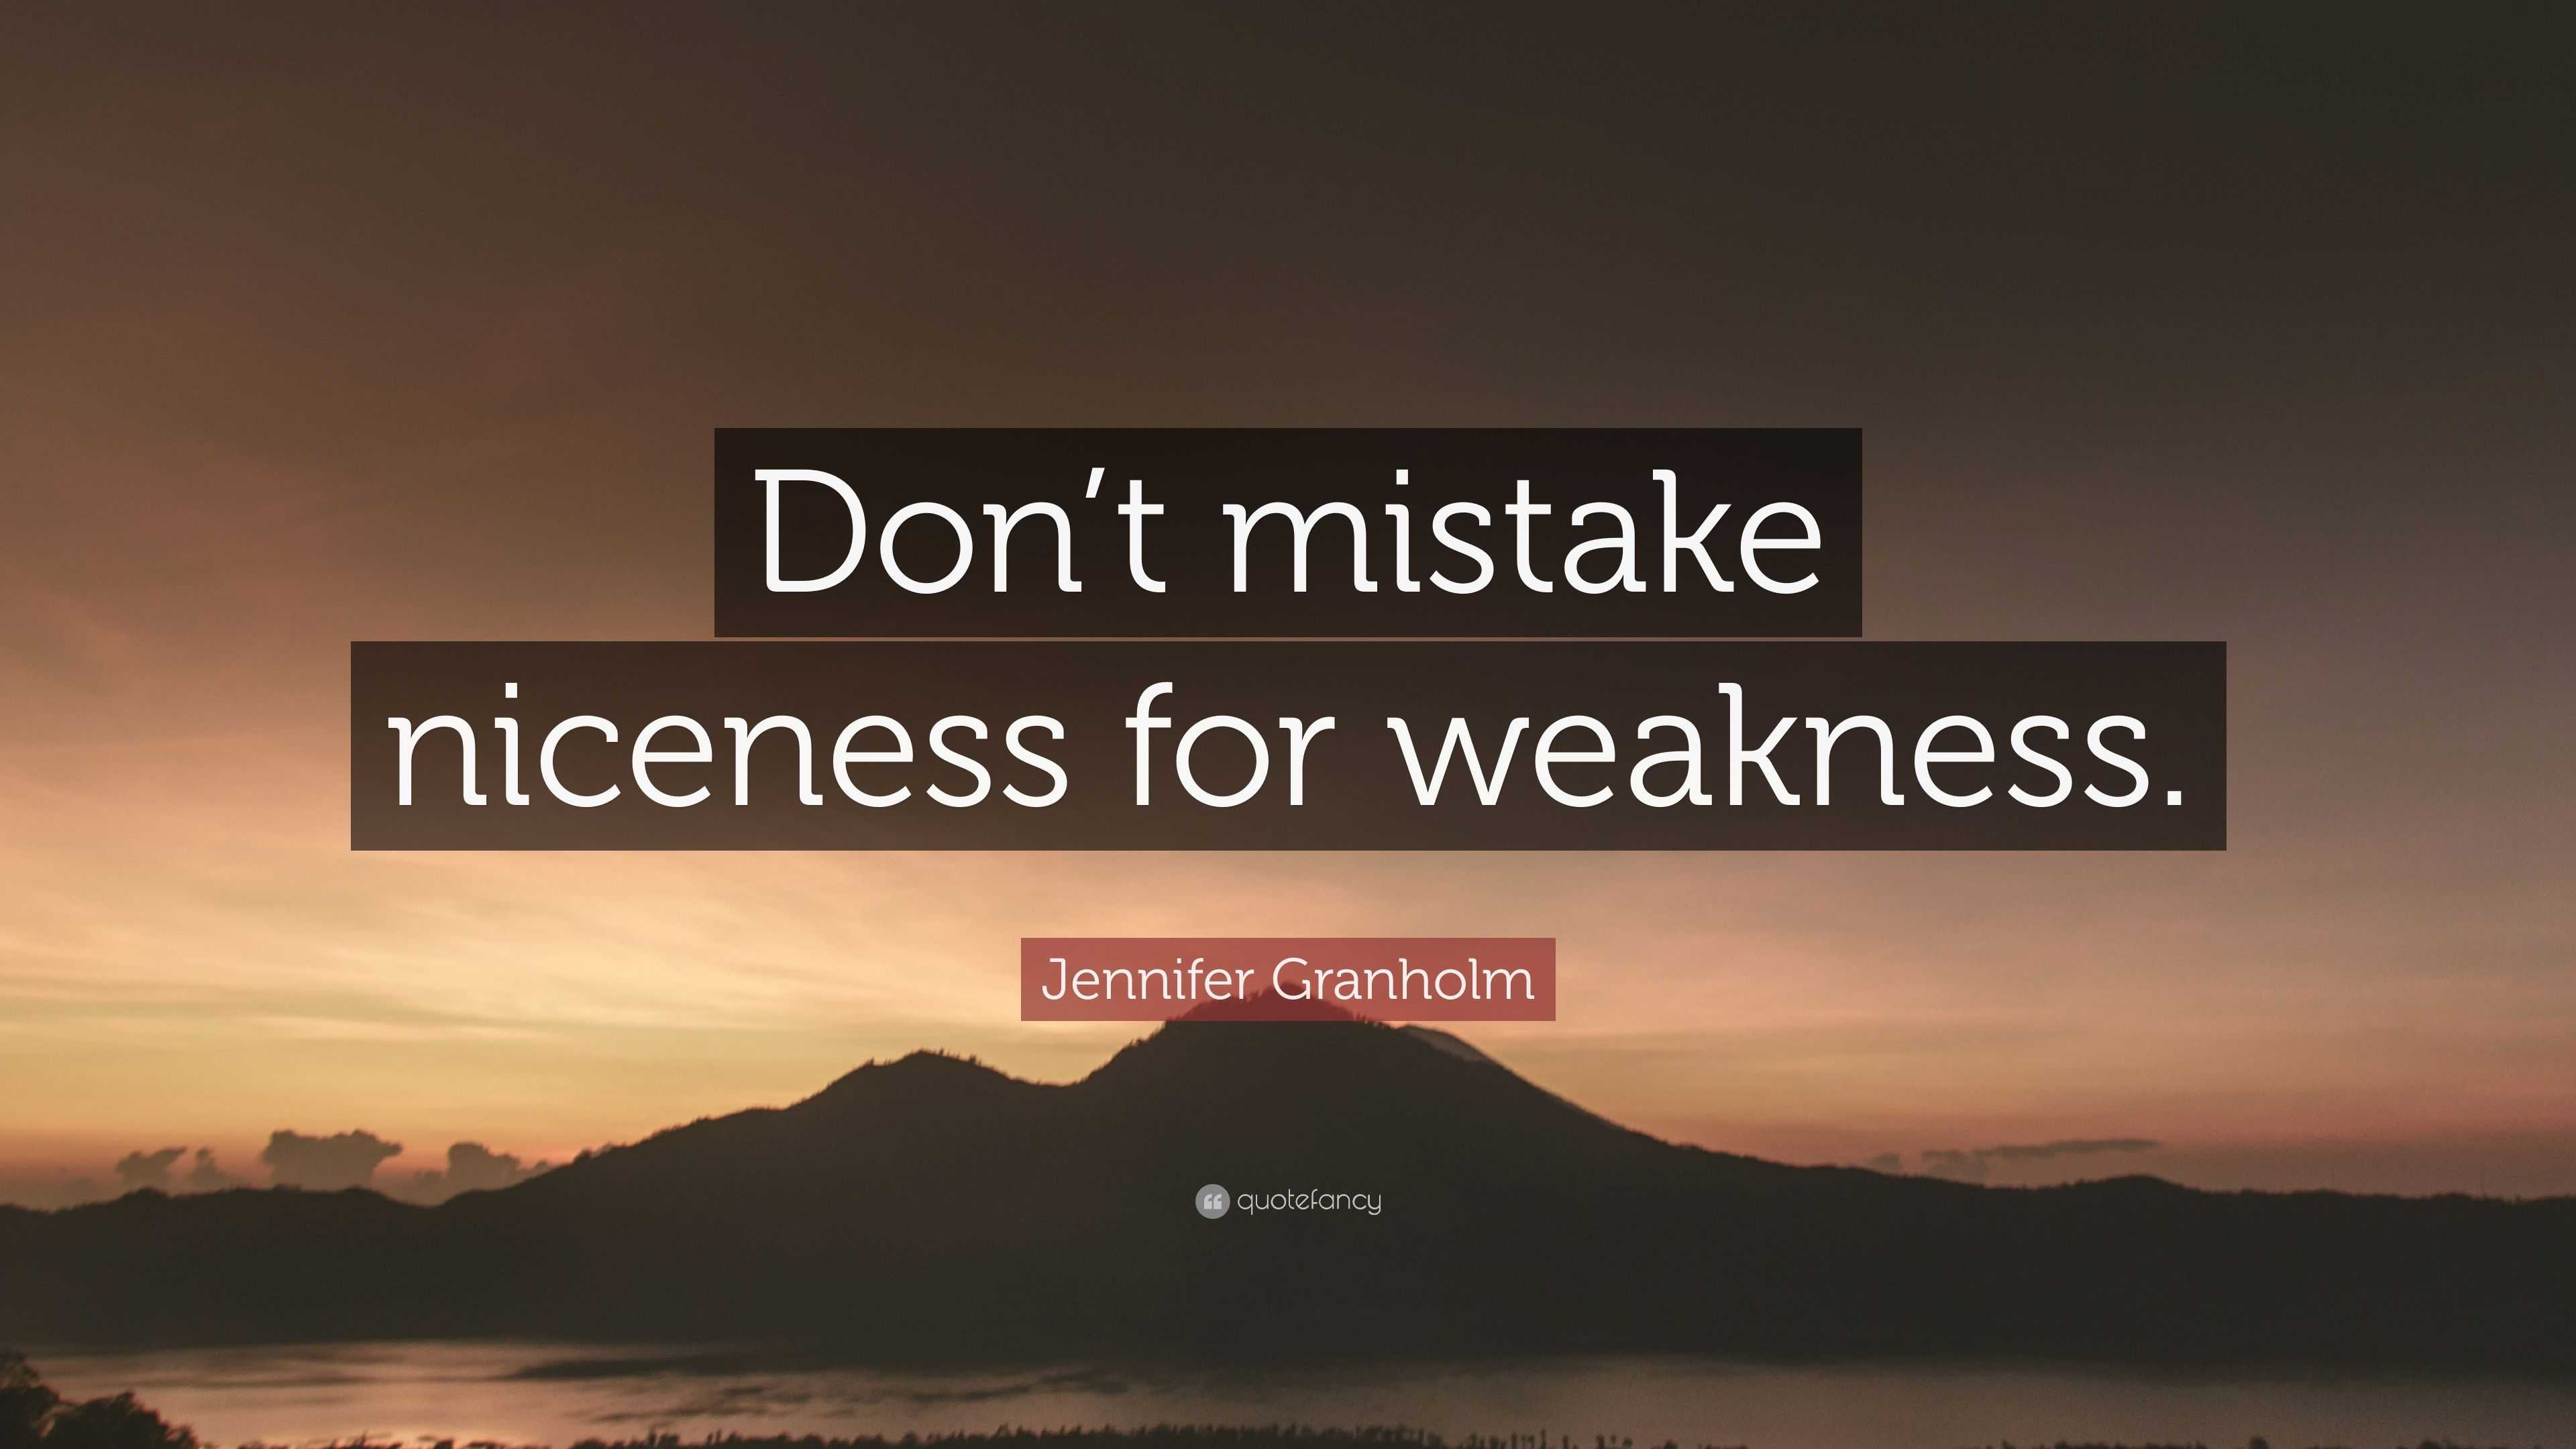 Jennifer Granholm Quote: “Don’t mistake niceness for weakness.”